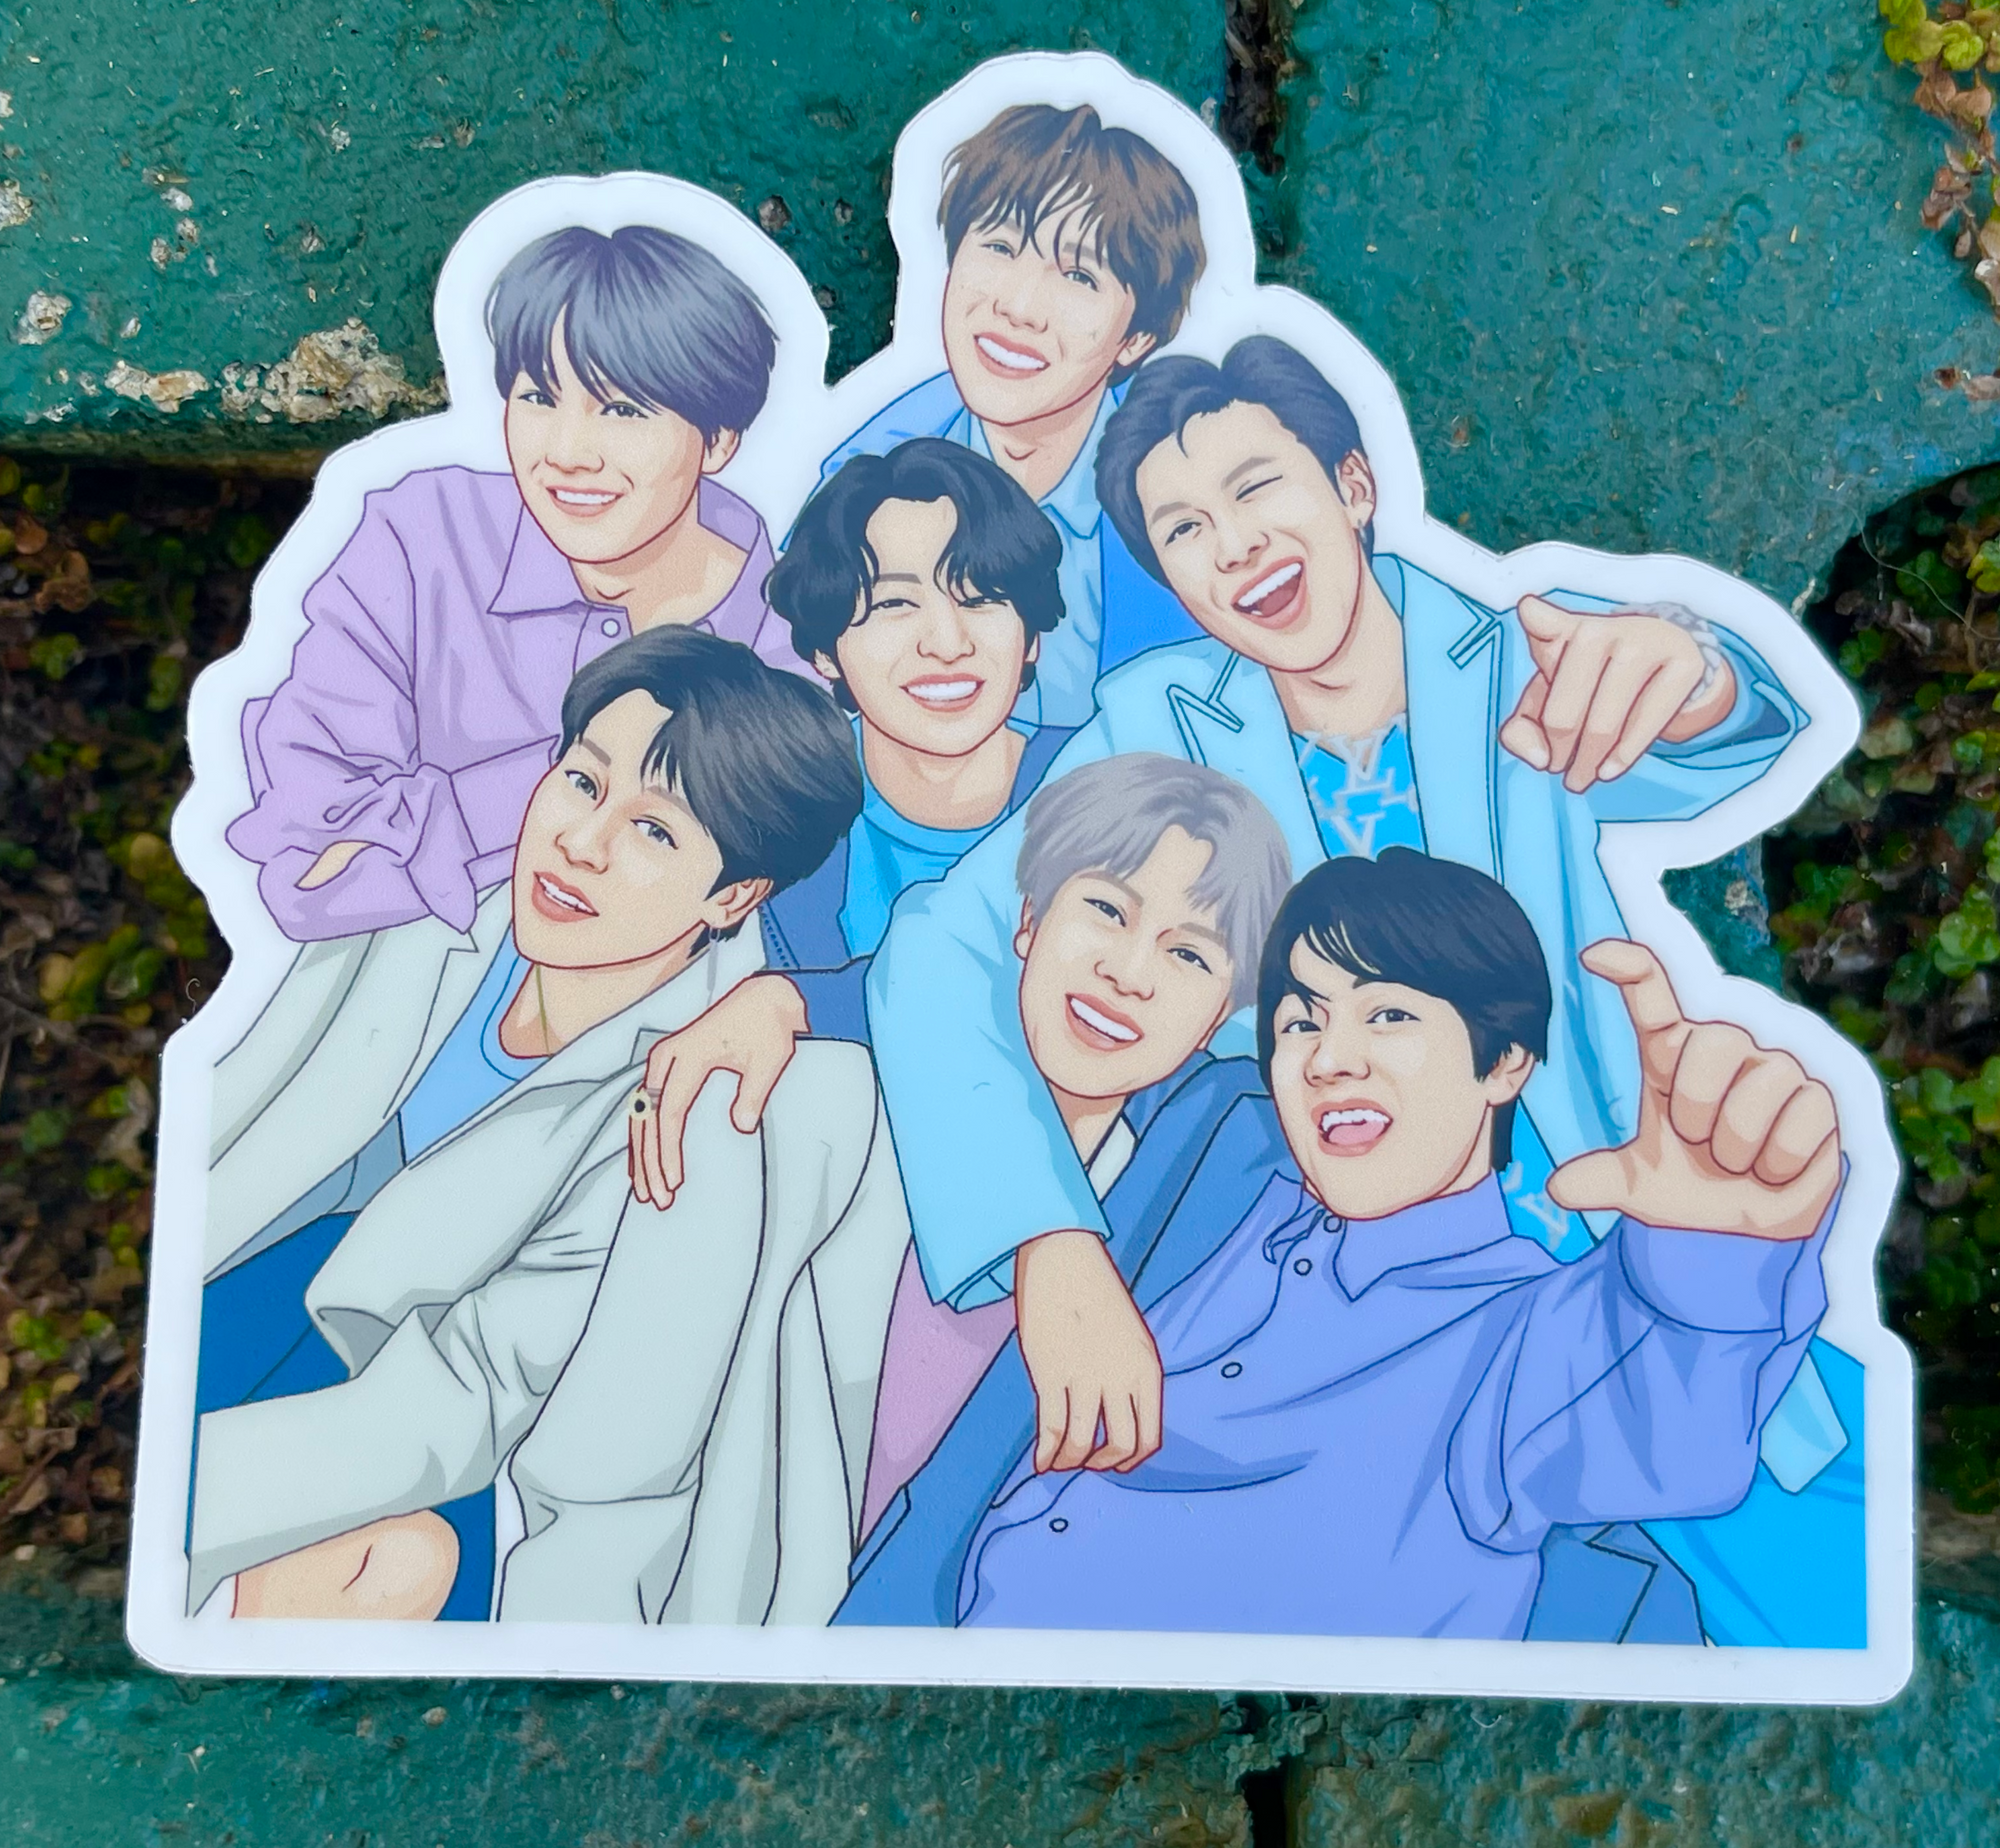 BTS Sticker – One 4 Inch Water Proof Vinyl Sticker – For Hydro Flask, Skateboard, Laptop, Planner, Car, Collecting, Gifting